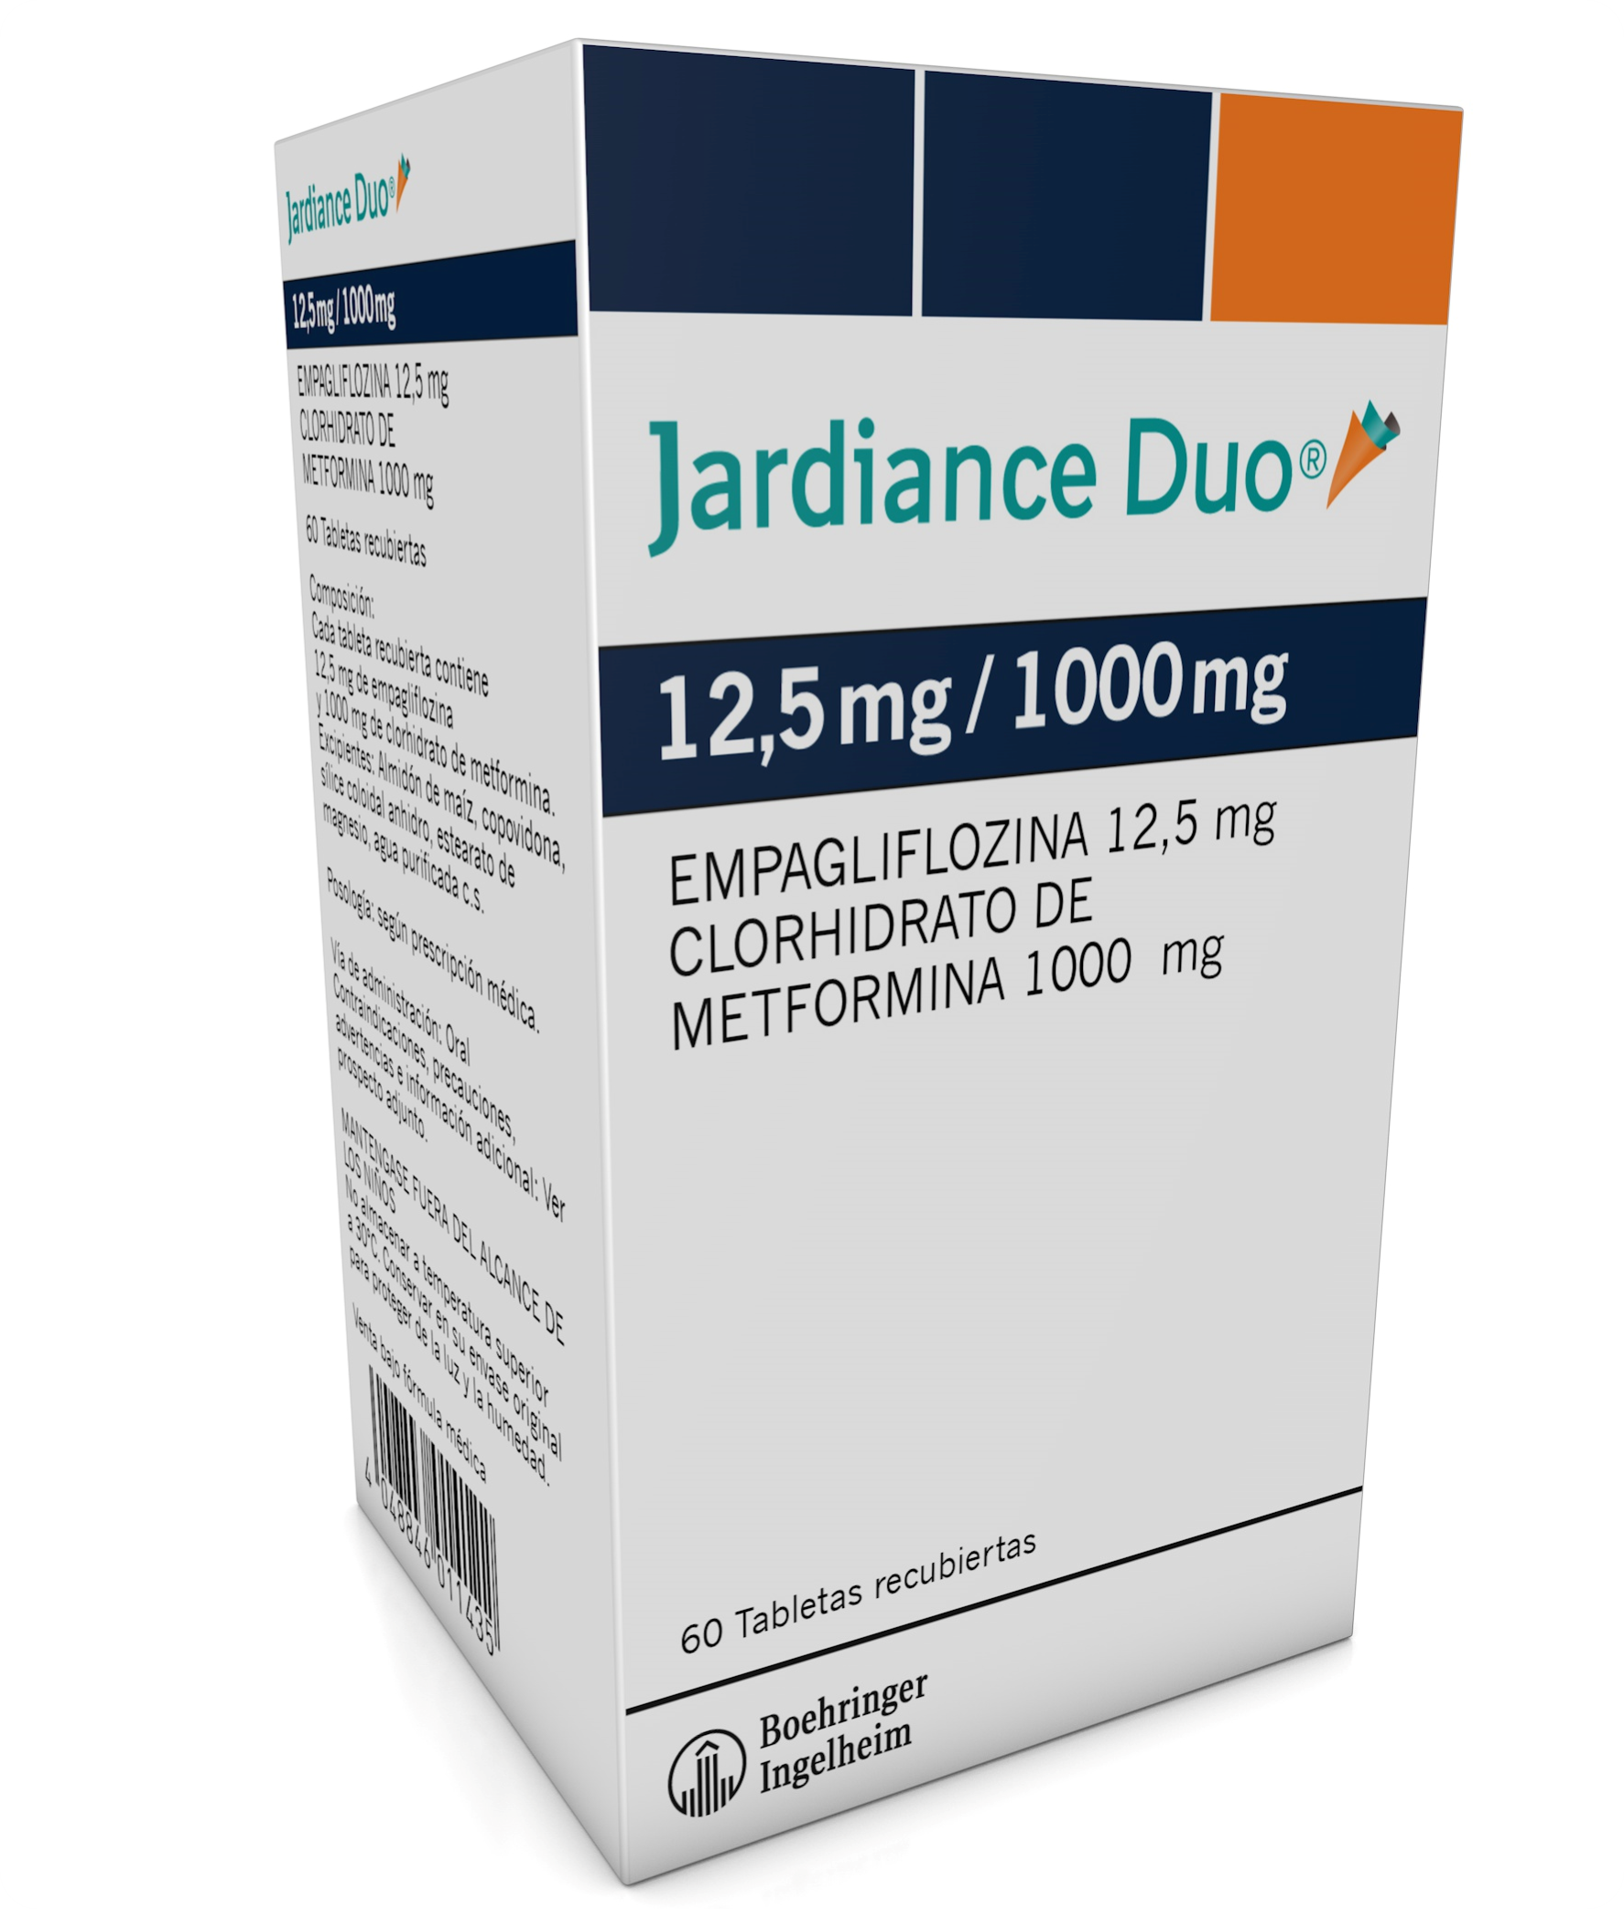 Jardiance 10 Mg Para Que Sirve - www.inf-inet.com